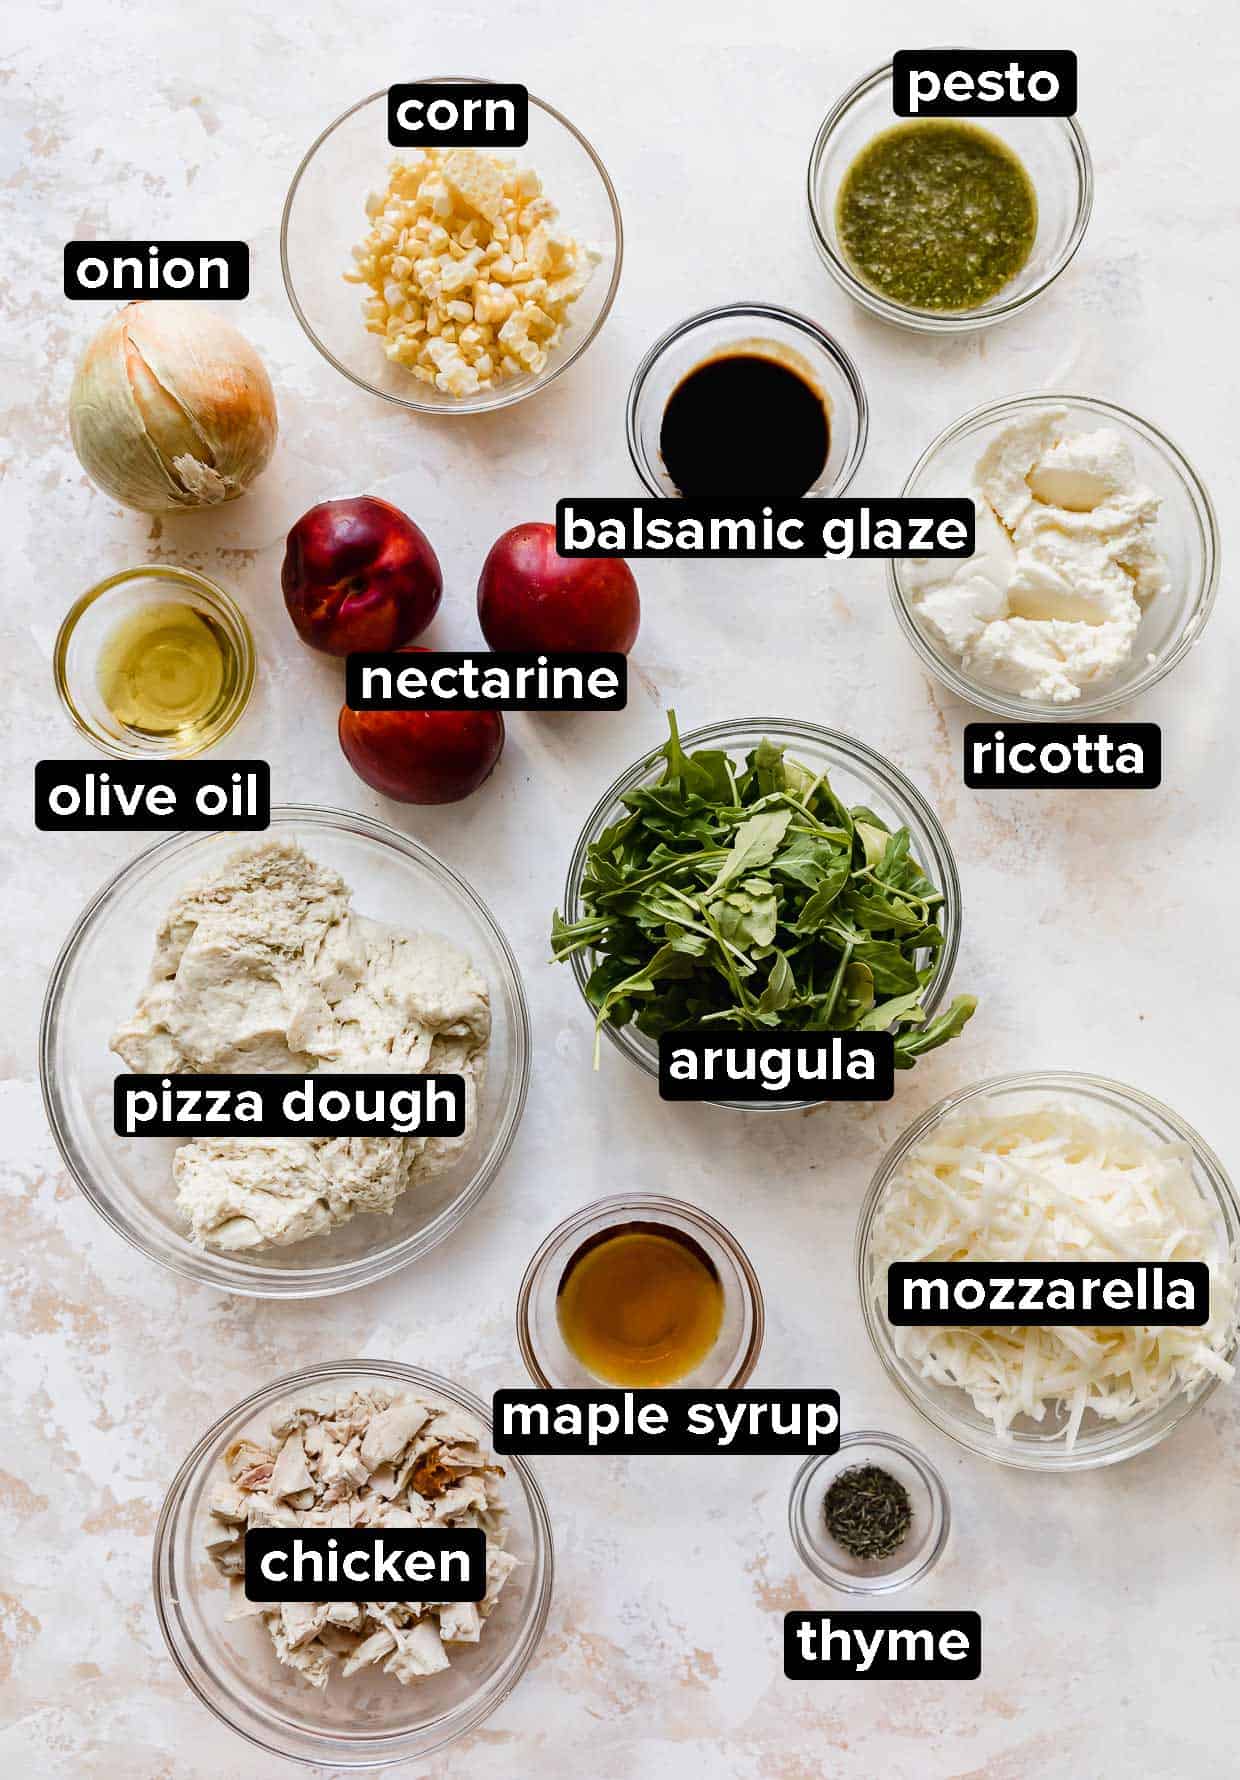 Arugula Pizza ingredients portioned into glass bowls on a white background, ingredients include: ricotta, nectarines, chicken, thyme, corn, onion, pesto.